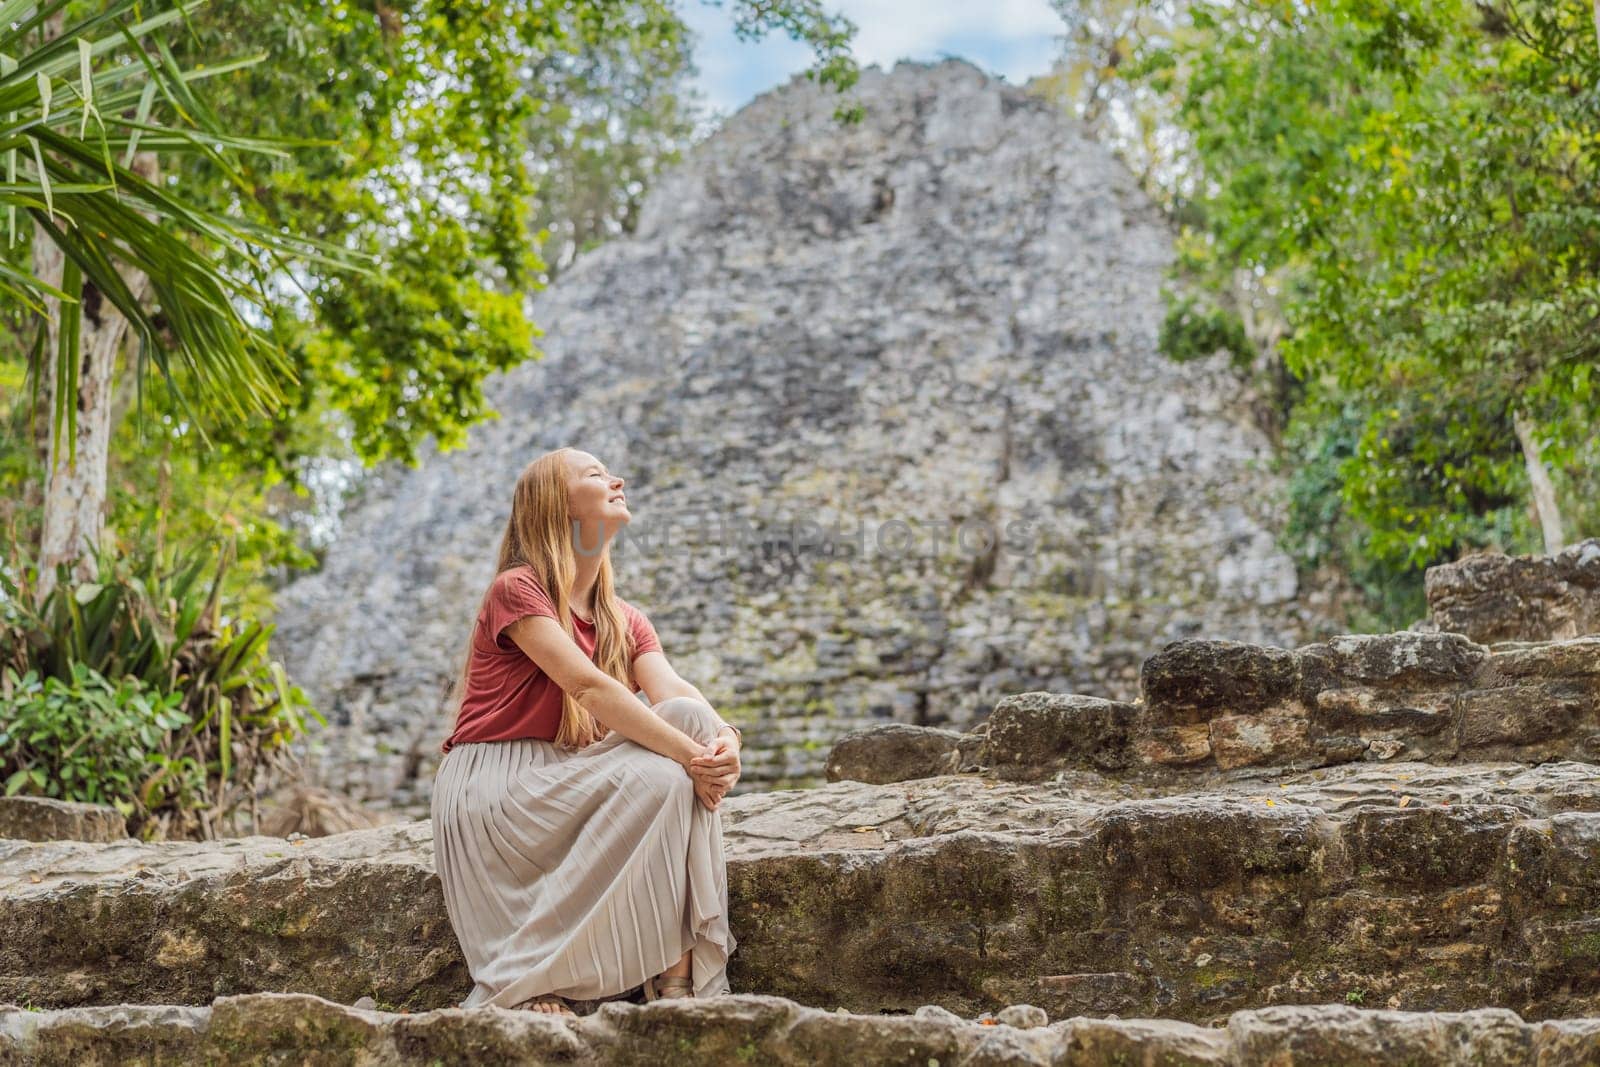 Woman tourist at Coba, Mexico. Ancient mayan city in Mexico. Coba is an archaeological area and a famous landmark of Yucatan Peninsula. Cloudy sky over a pyramid in Mexico by galitskaya